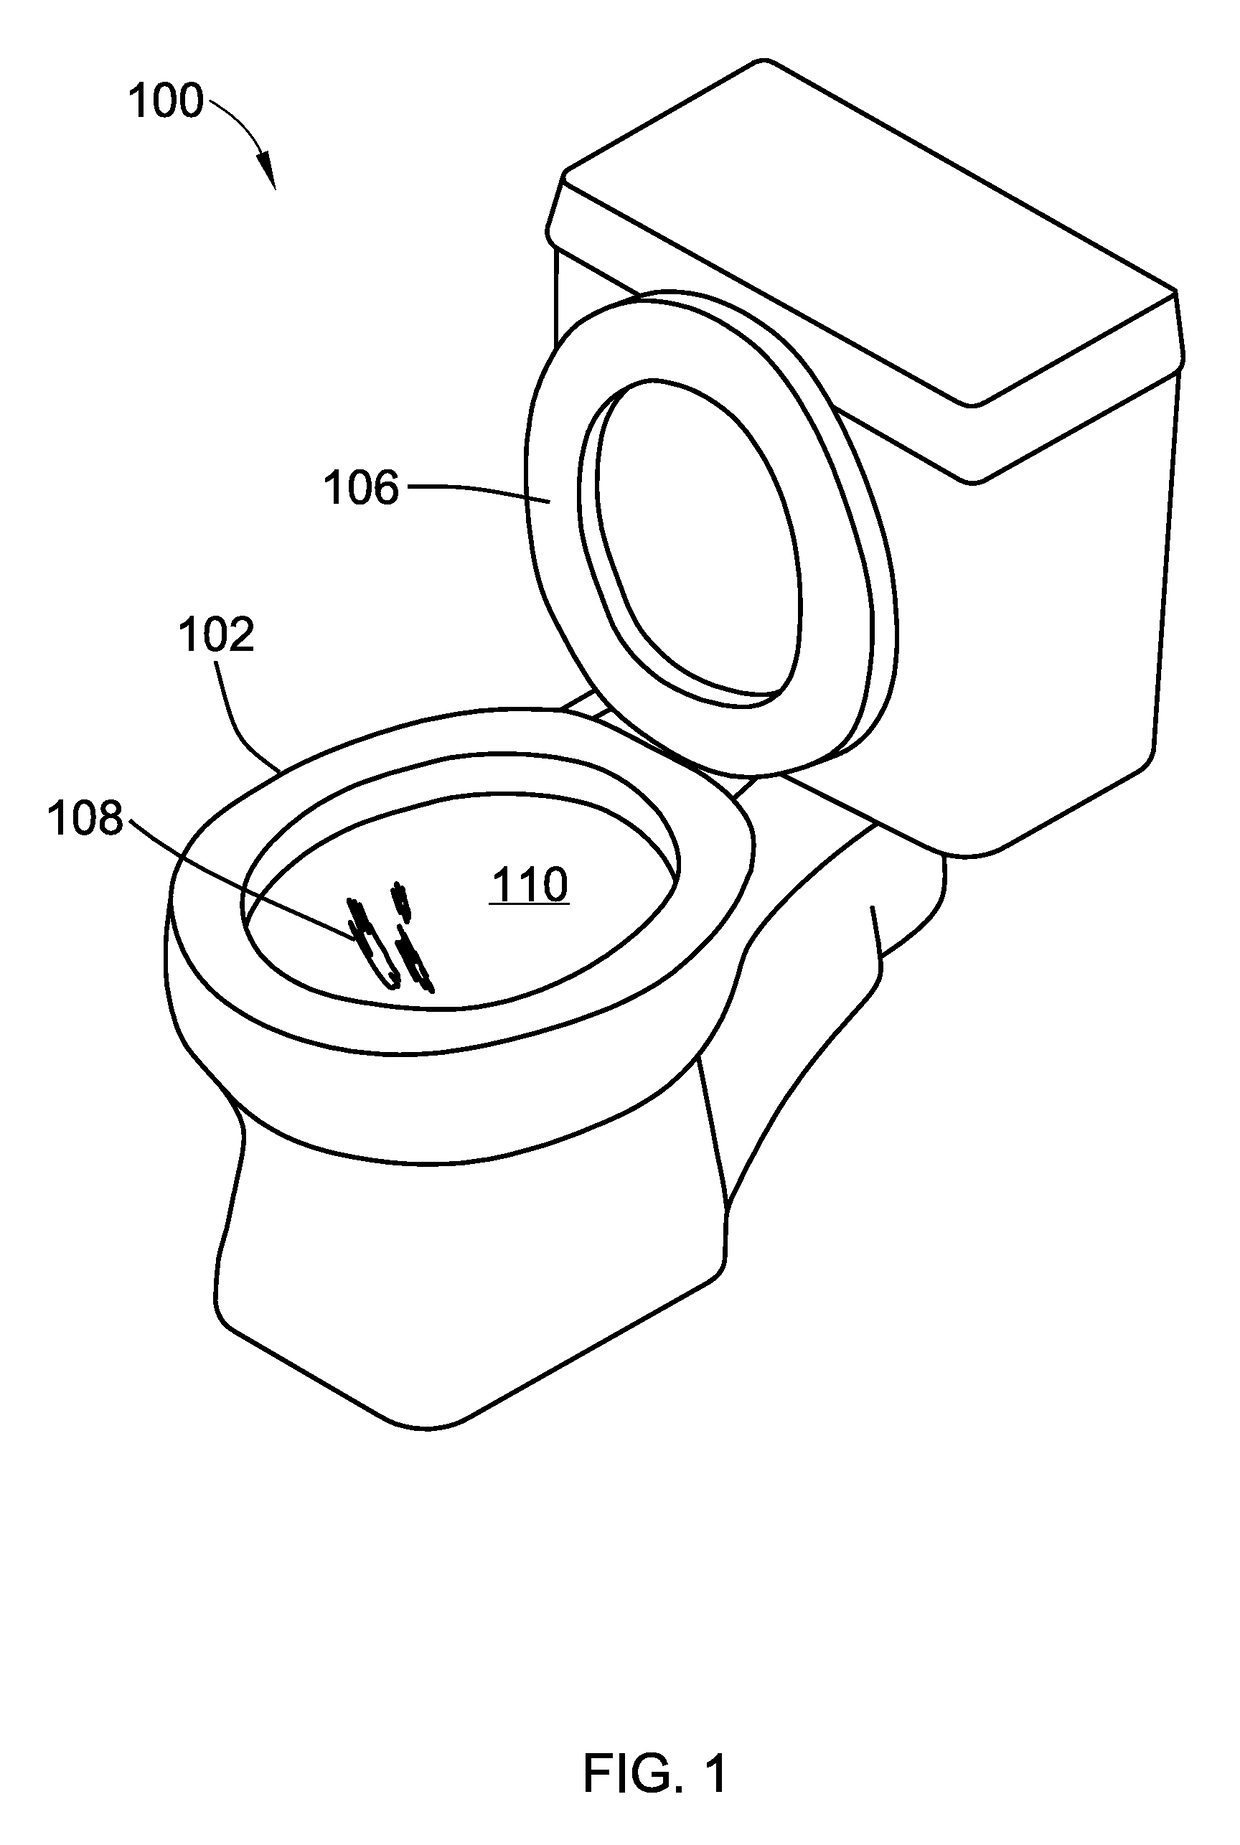 Self-cleaning helical drain toilet